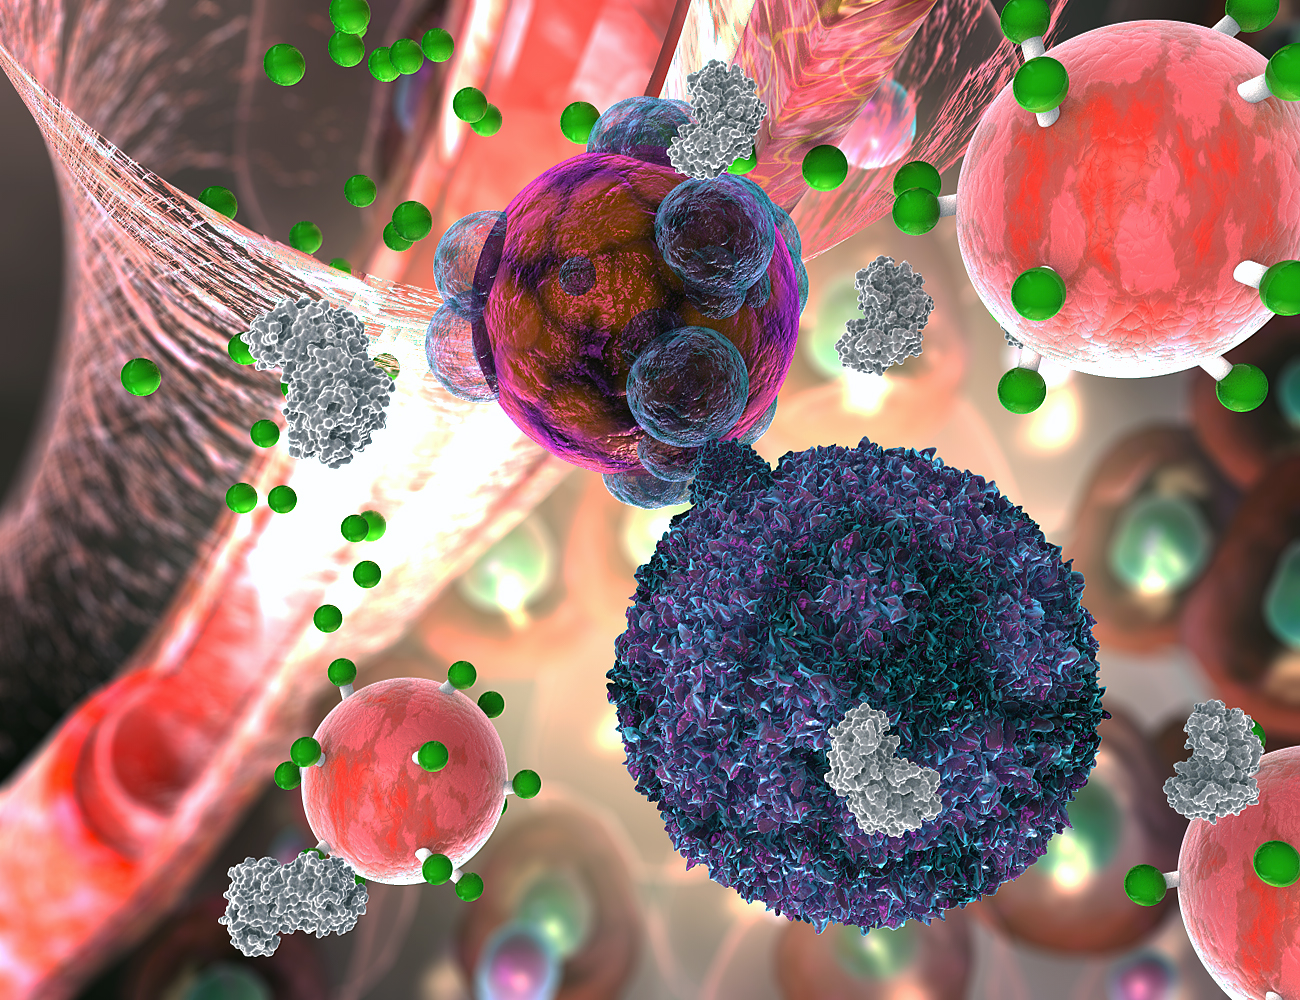 A T cell, here in violet, makes contact with a transplant organ cell, here in brown and purple. The T cell secretes the enzyme granzyme B, here in gray, which attacks the organ cell. But granzyme B also severs fluorescent signal molecules, in green, from the rejection detecting nanoparticle, in light red. The signal molecules makes their way into the urine, where they give off a fluorescent cue.